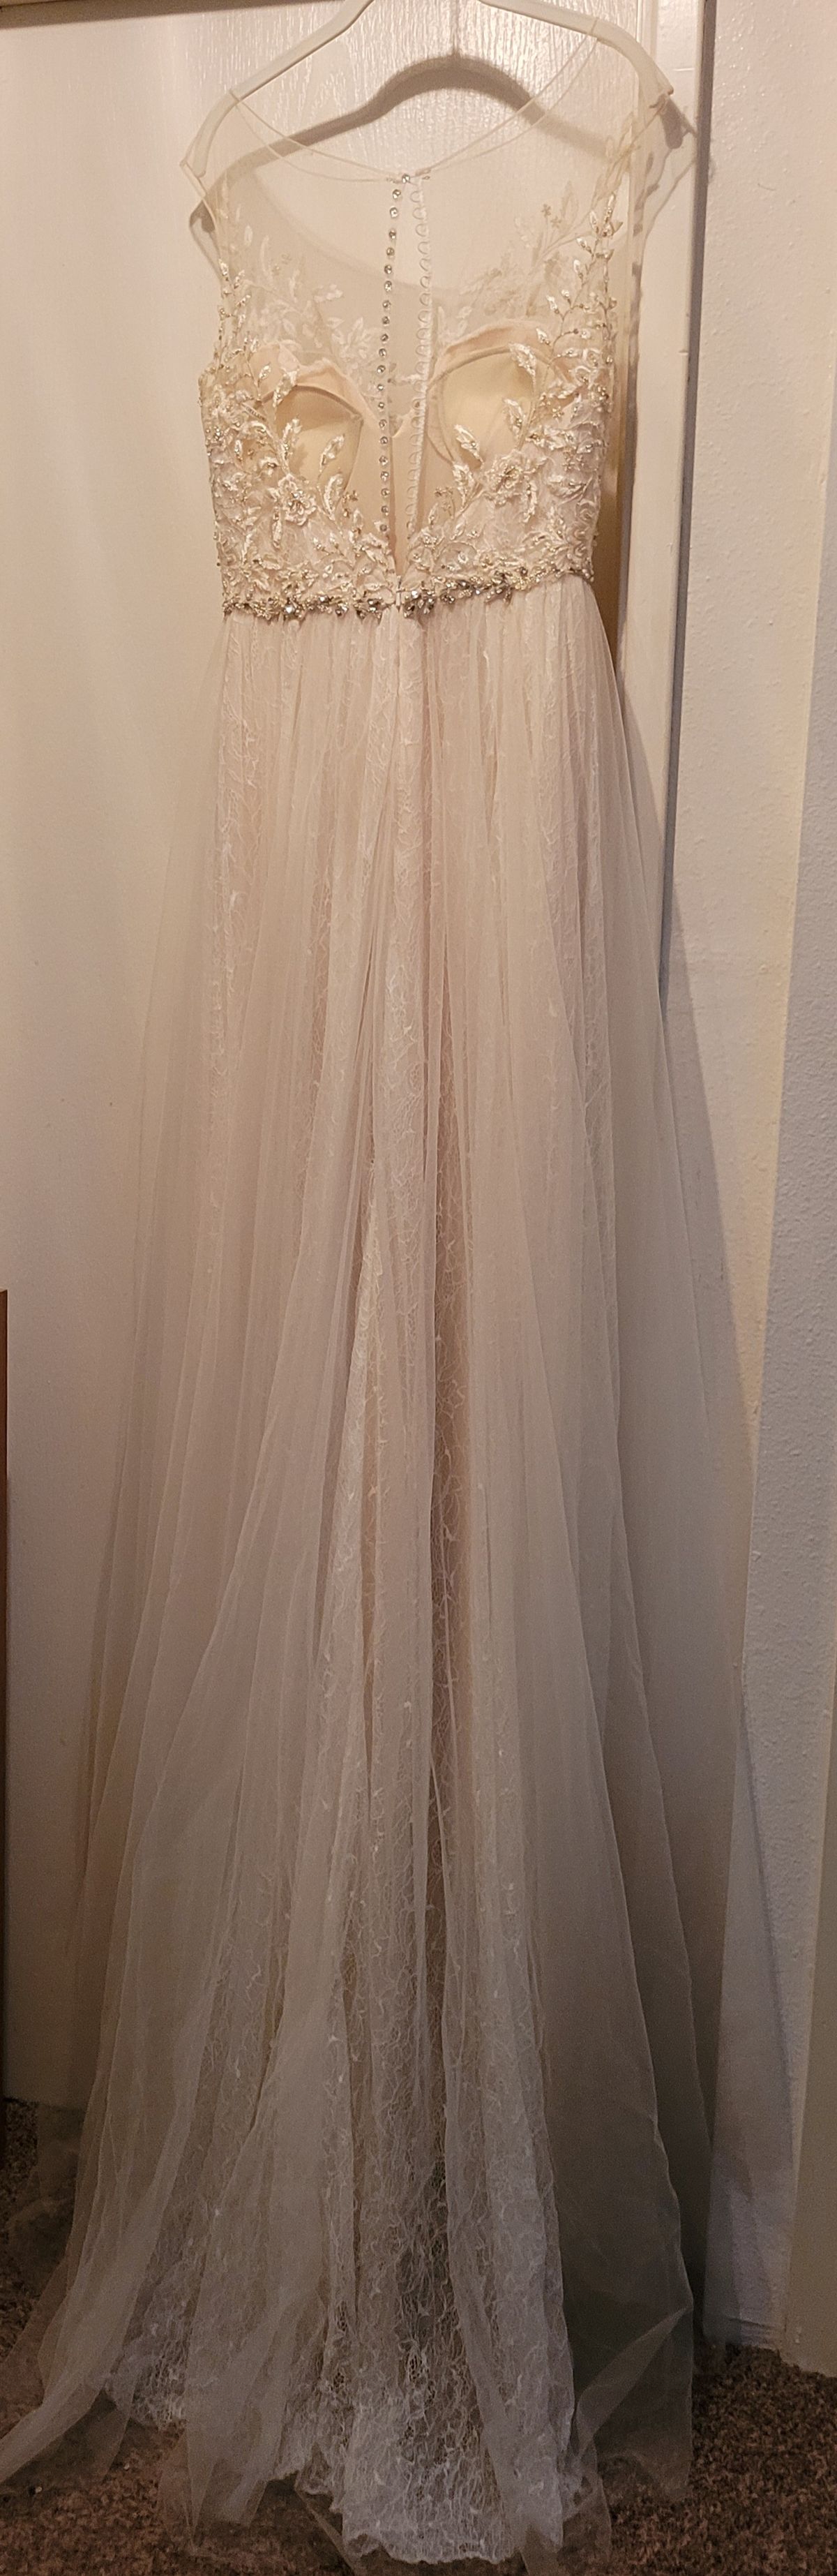 Sottero-Midgley  Size 10 Lace Nude Dress With Train on Queenly